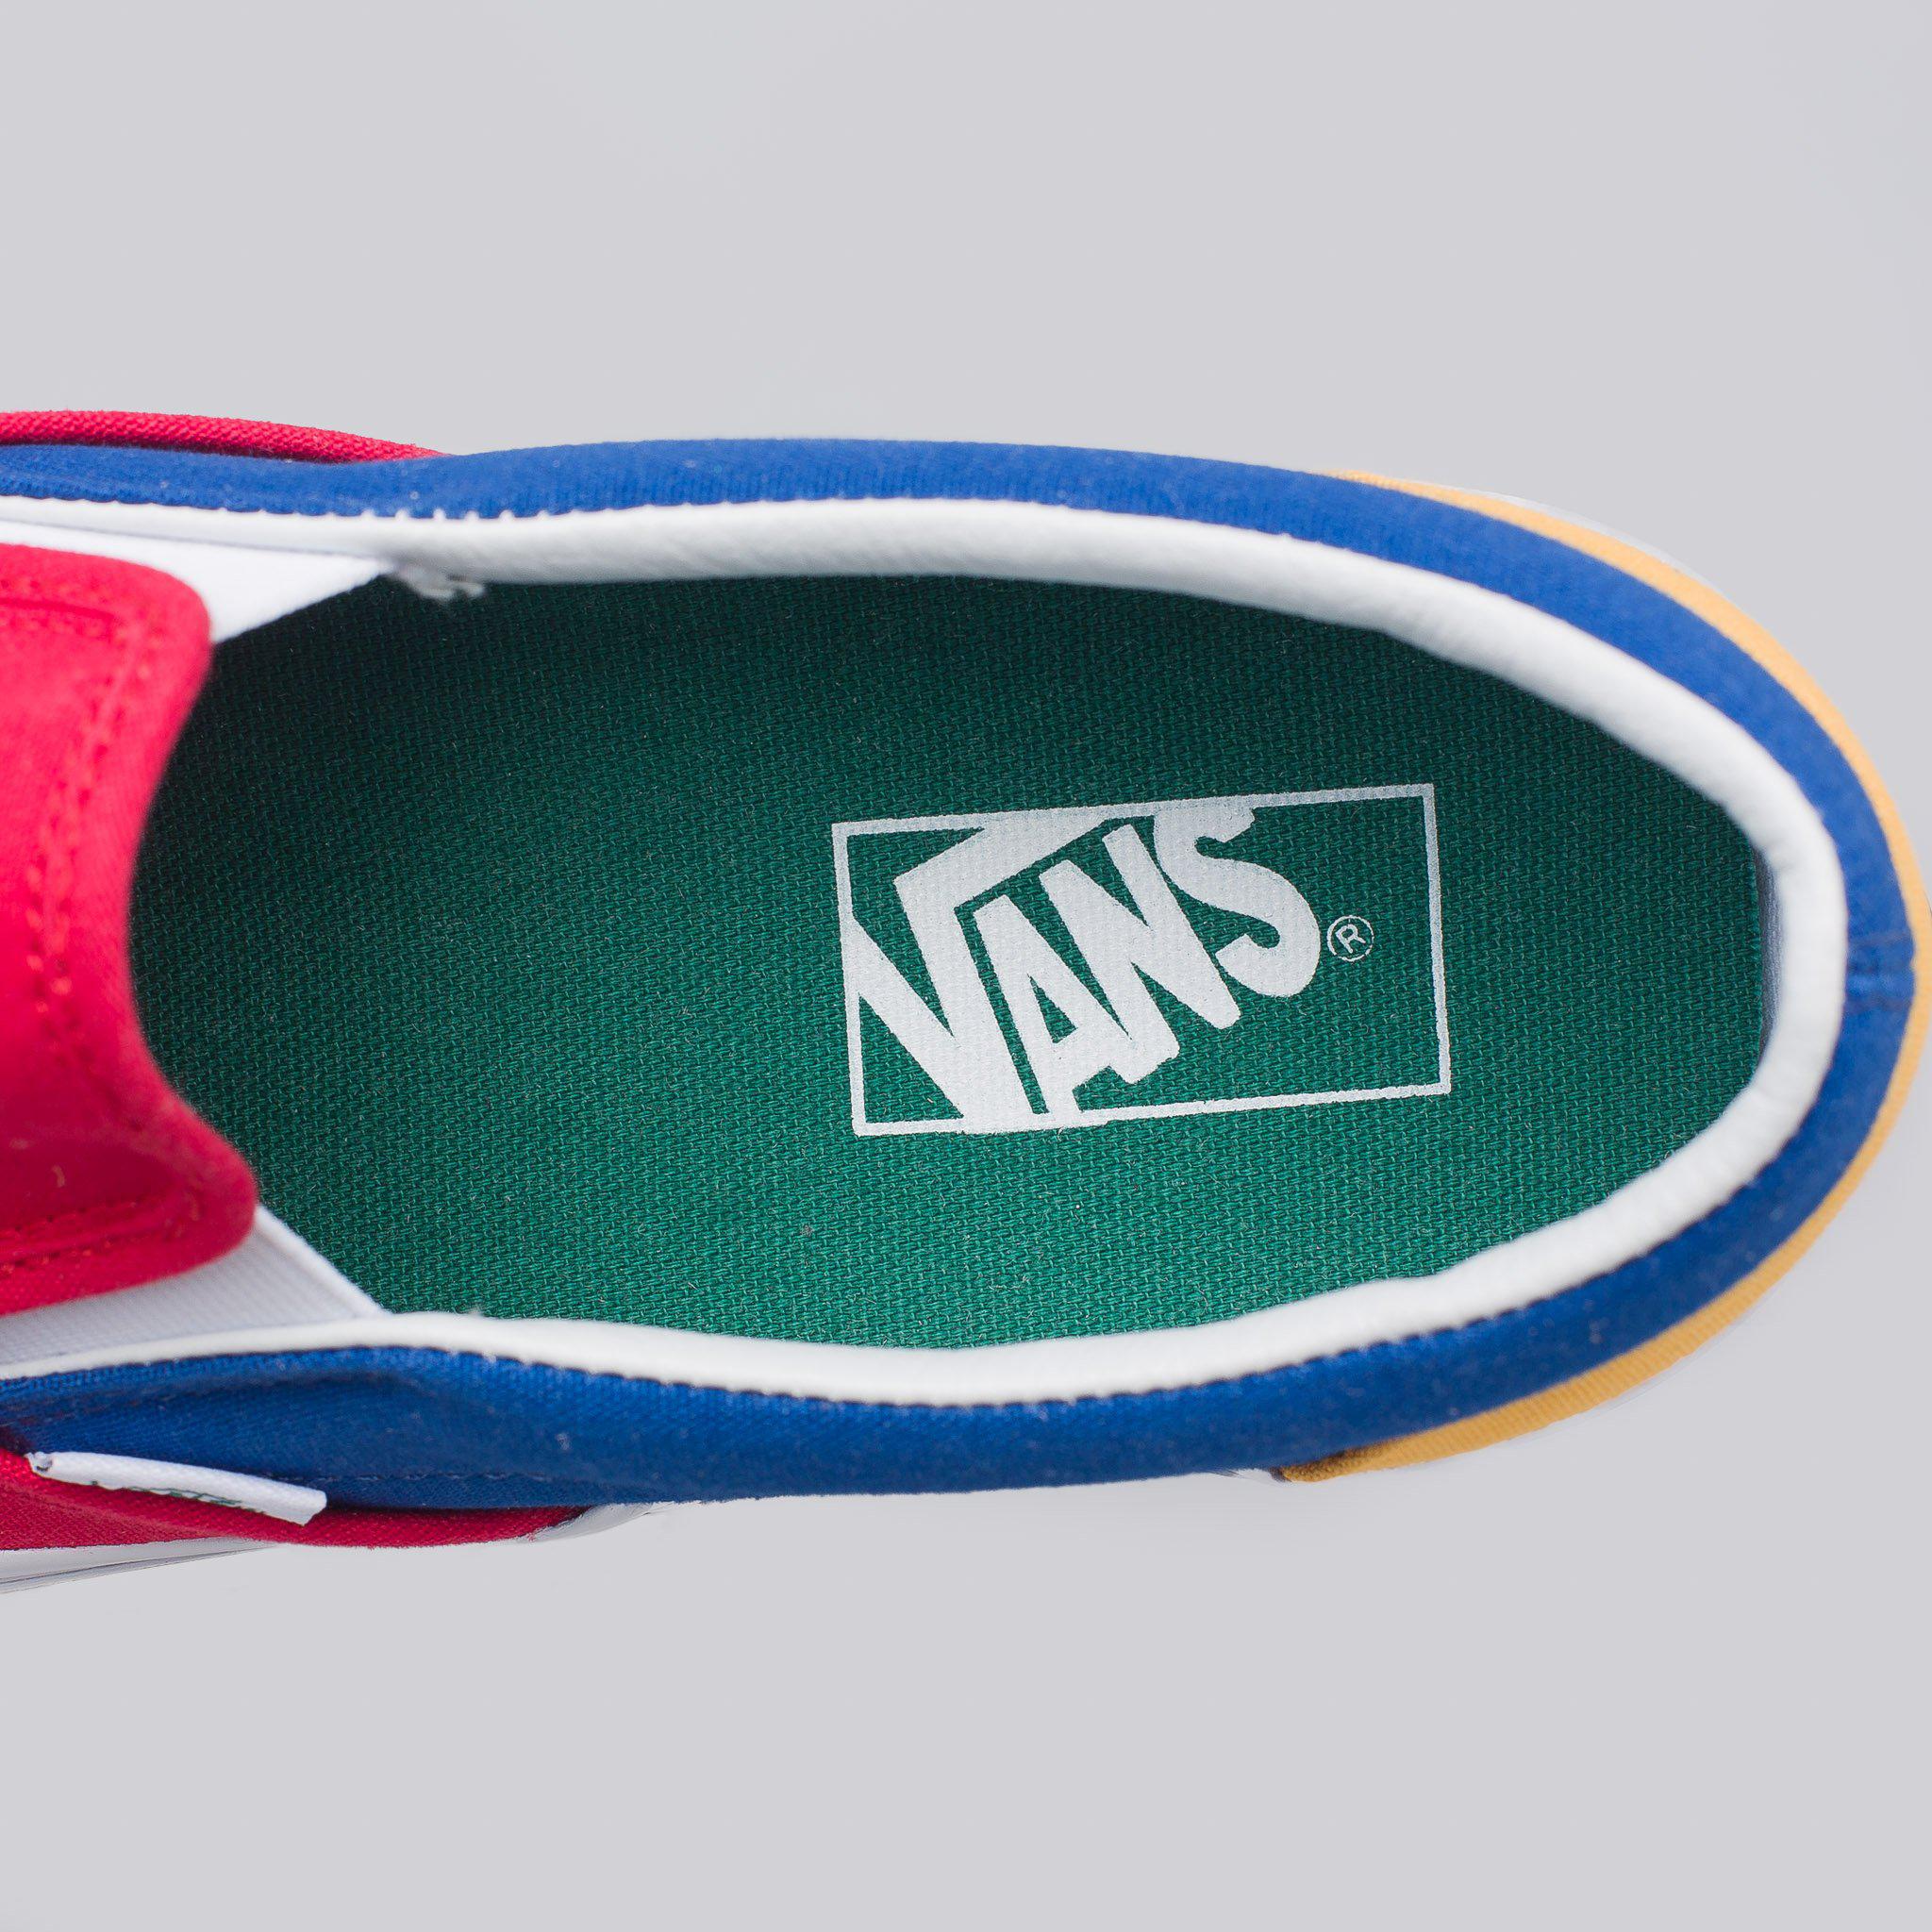 blue green red and yellow vans